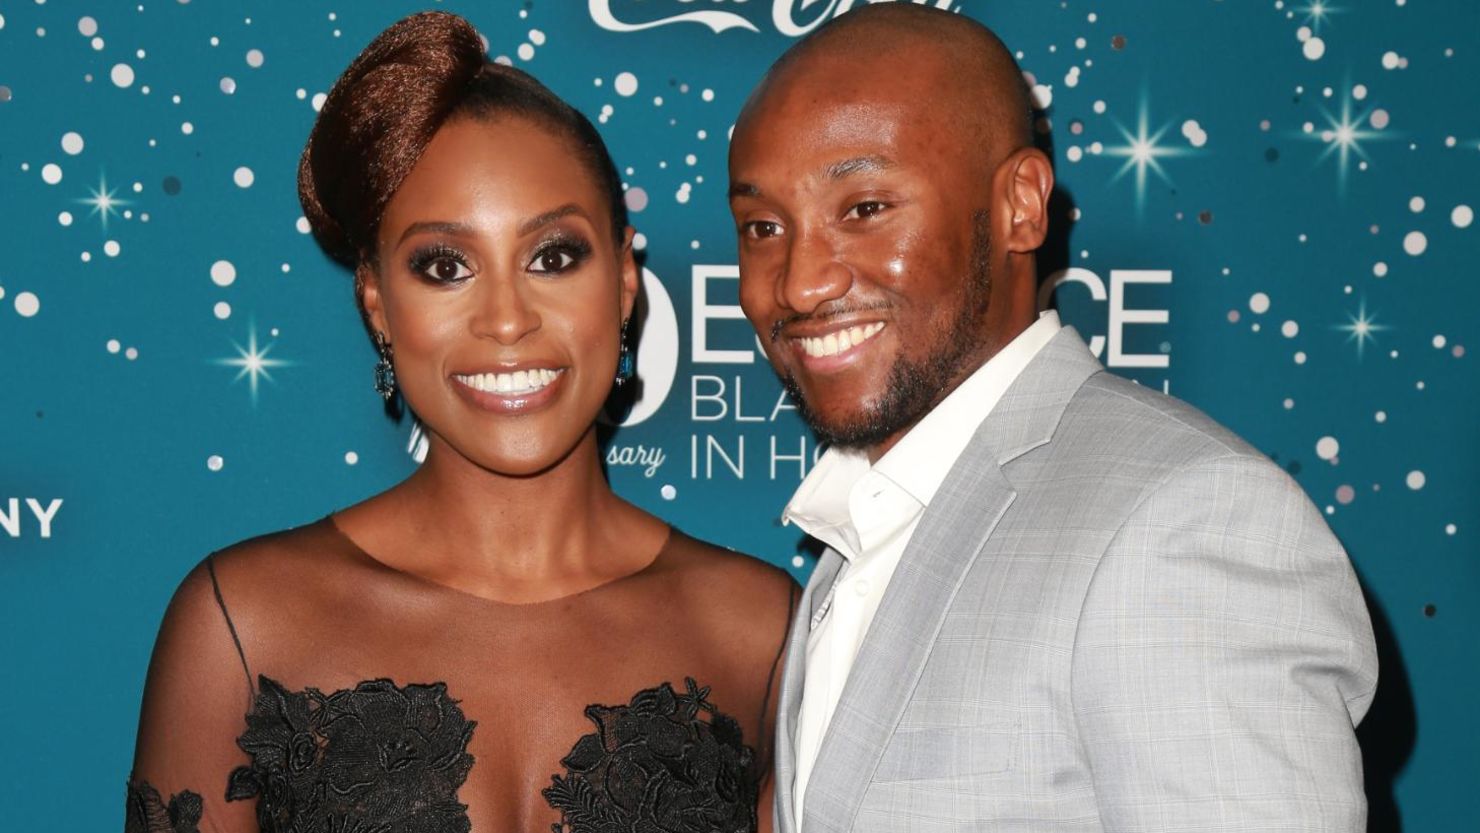 Issa Rae, shown at the Essence Black Women in Hollywood Awards in Beverly Hills in 2017, with Louis Diame, whom she has married.